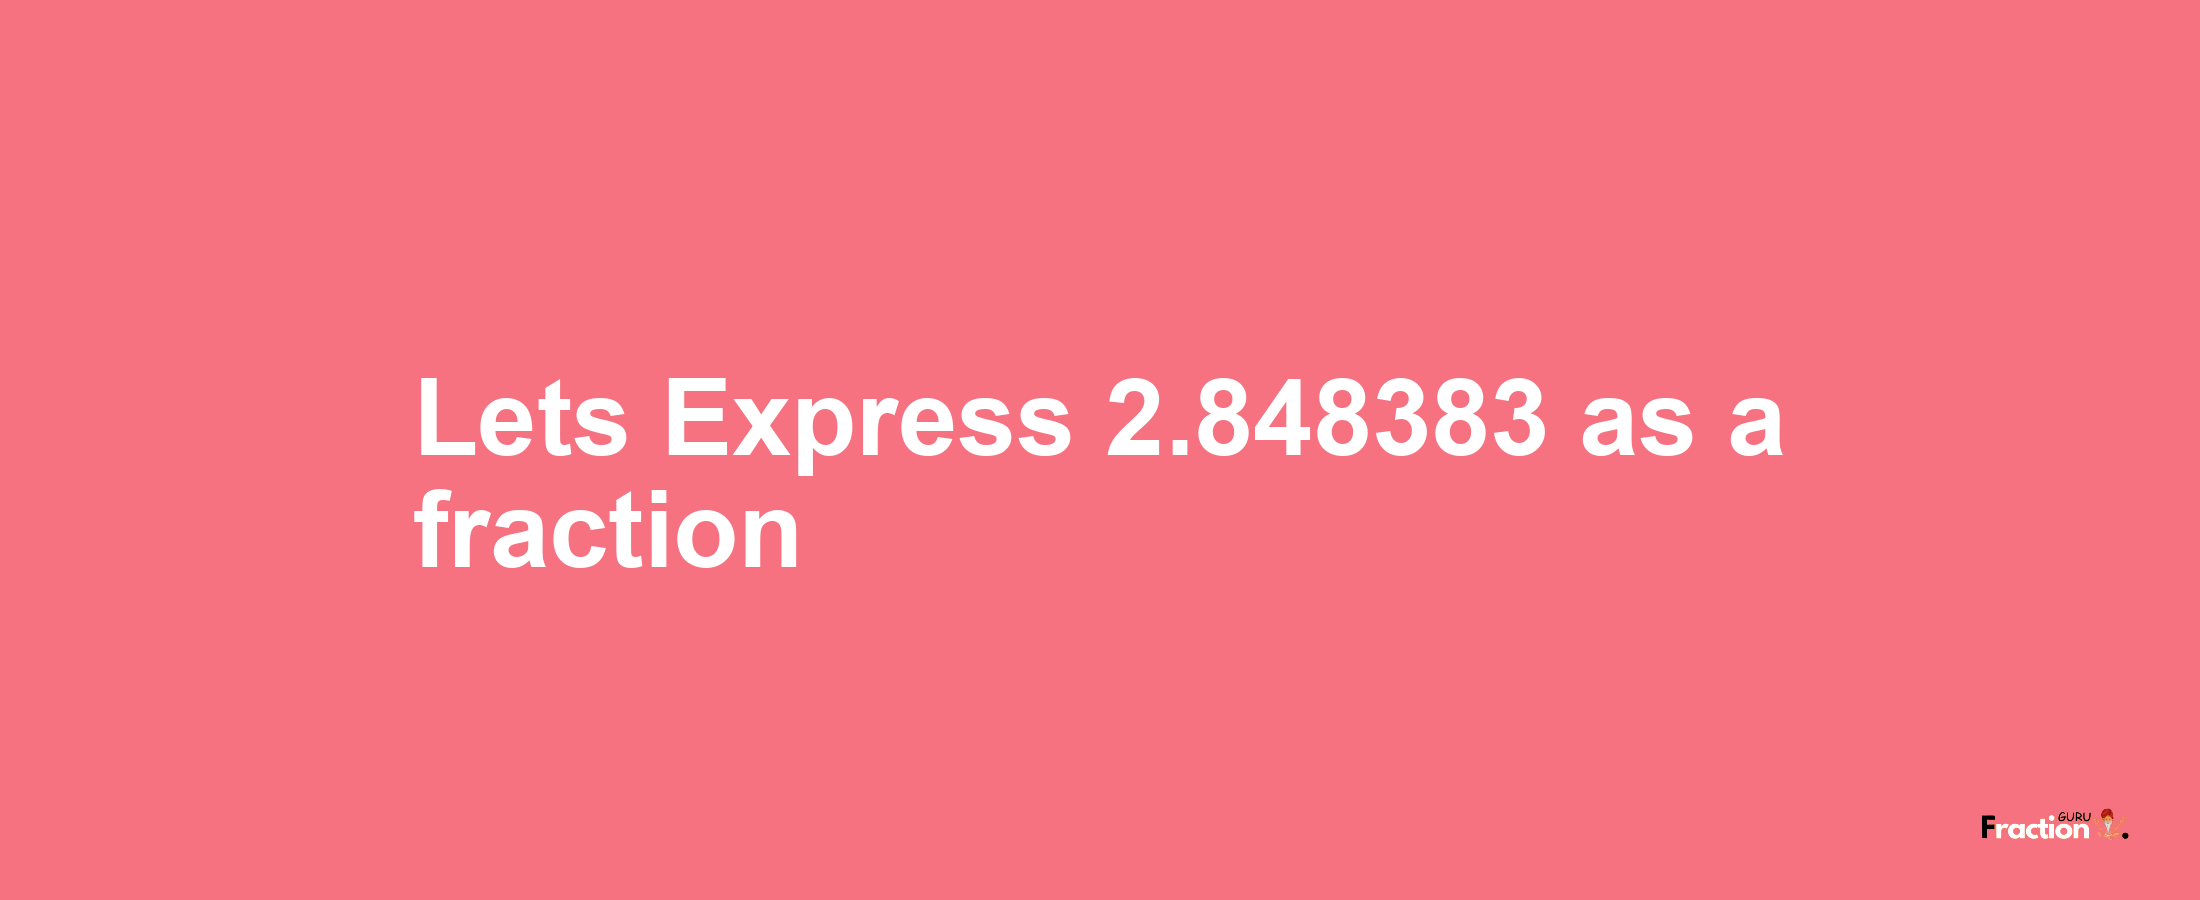 Lets Express 2.848383 as afraction